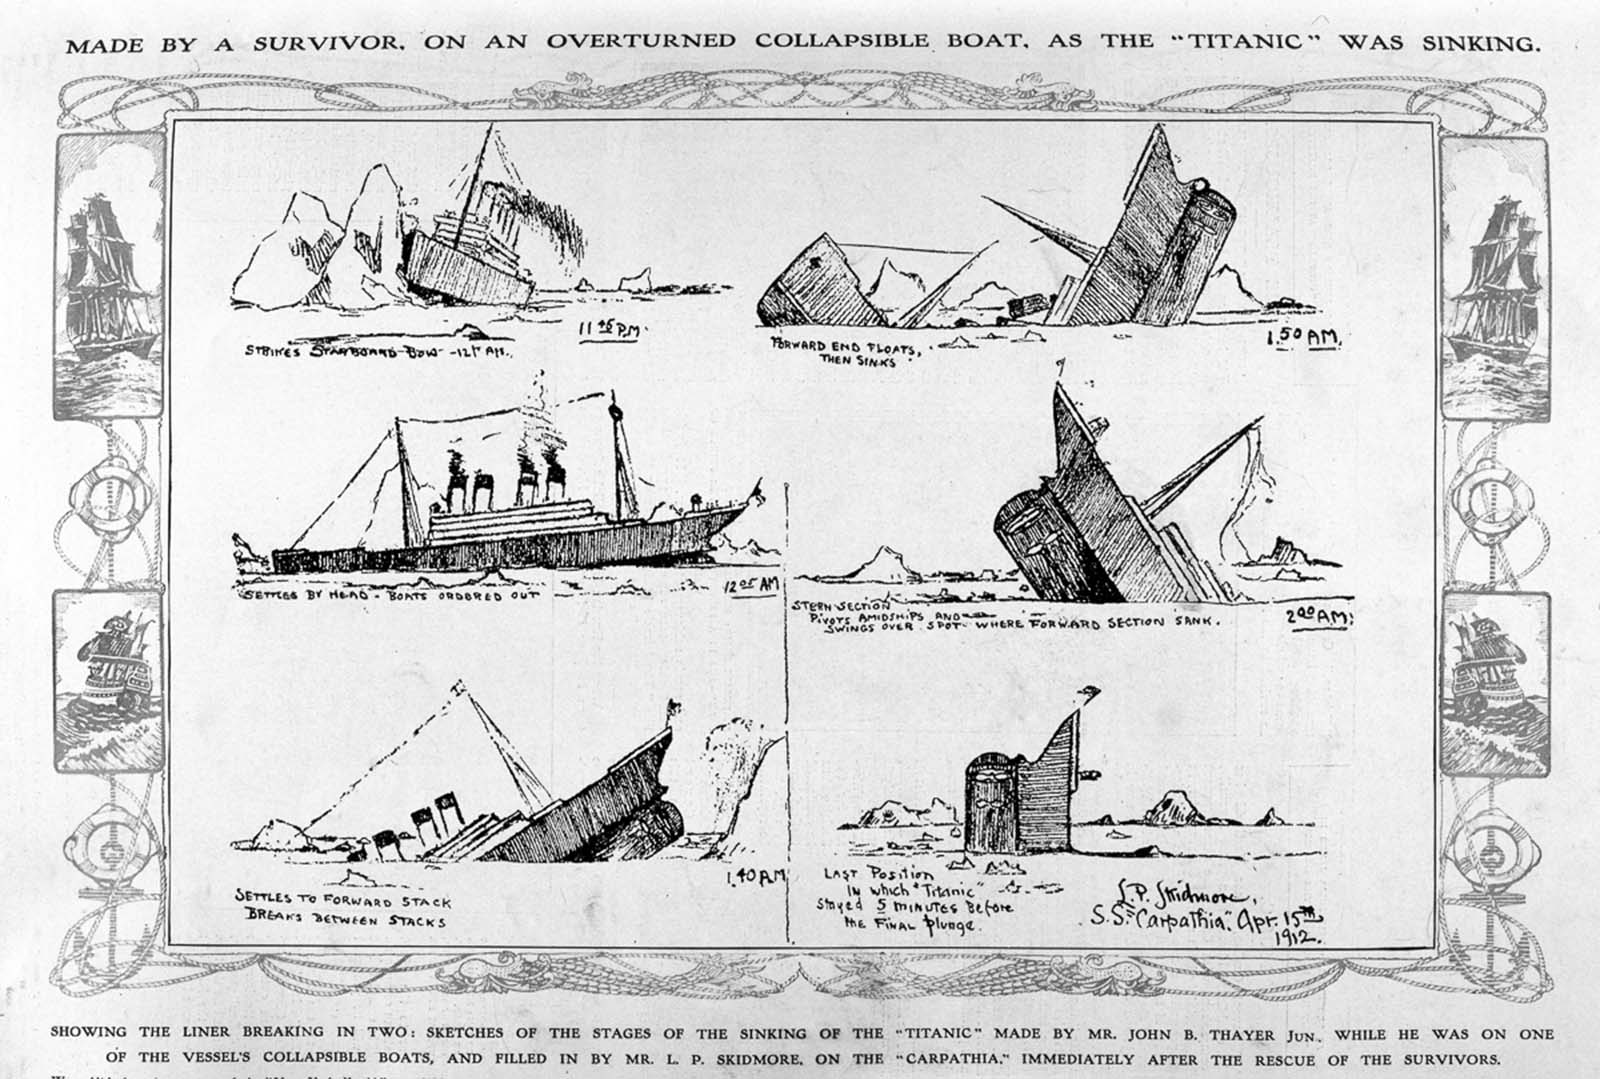 A sketch of the sinking drawn by John B. Thayer while he was on a capsized lifeboat, and filled in by P.L. Skidmore aboard the Carpathia.